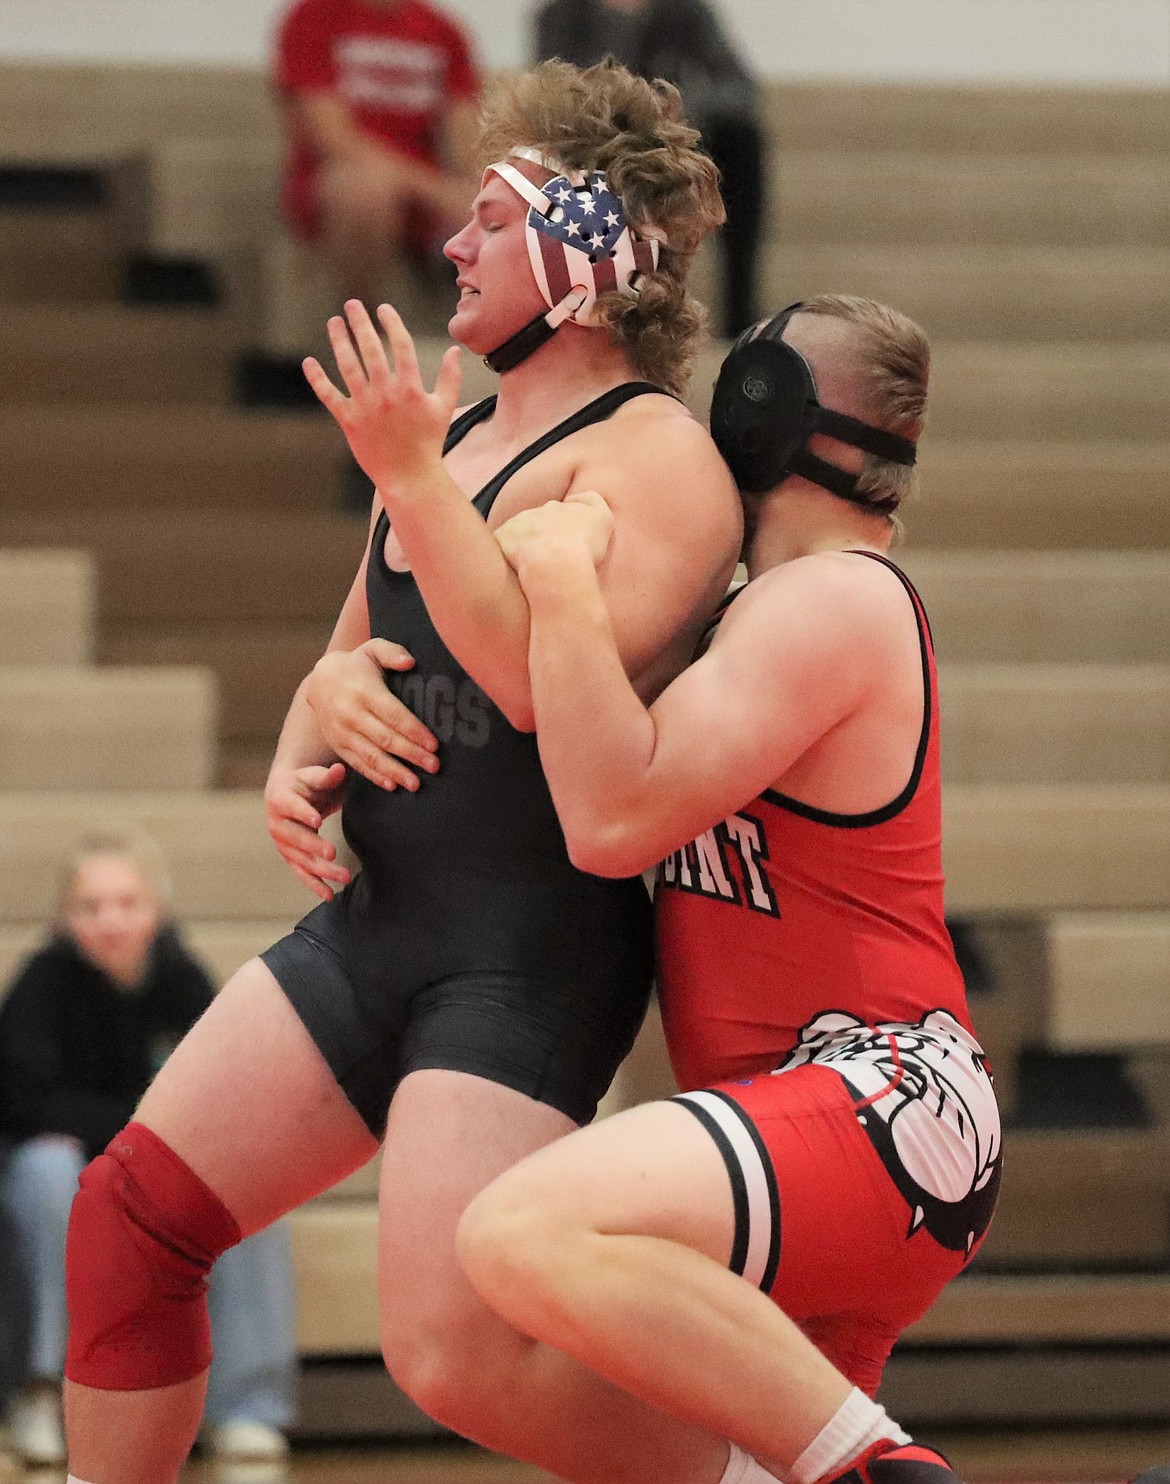 Blake Sherrill (left) tries to avoid being taken down by Austin Smith on Wednesday.